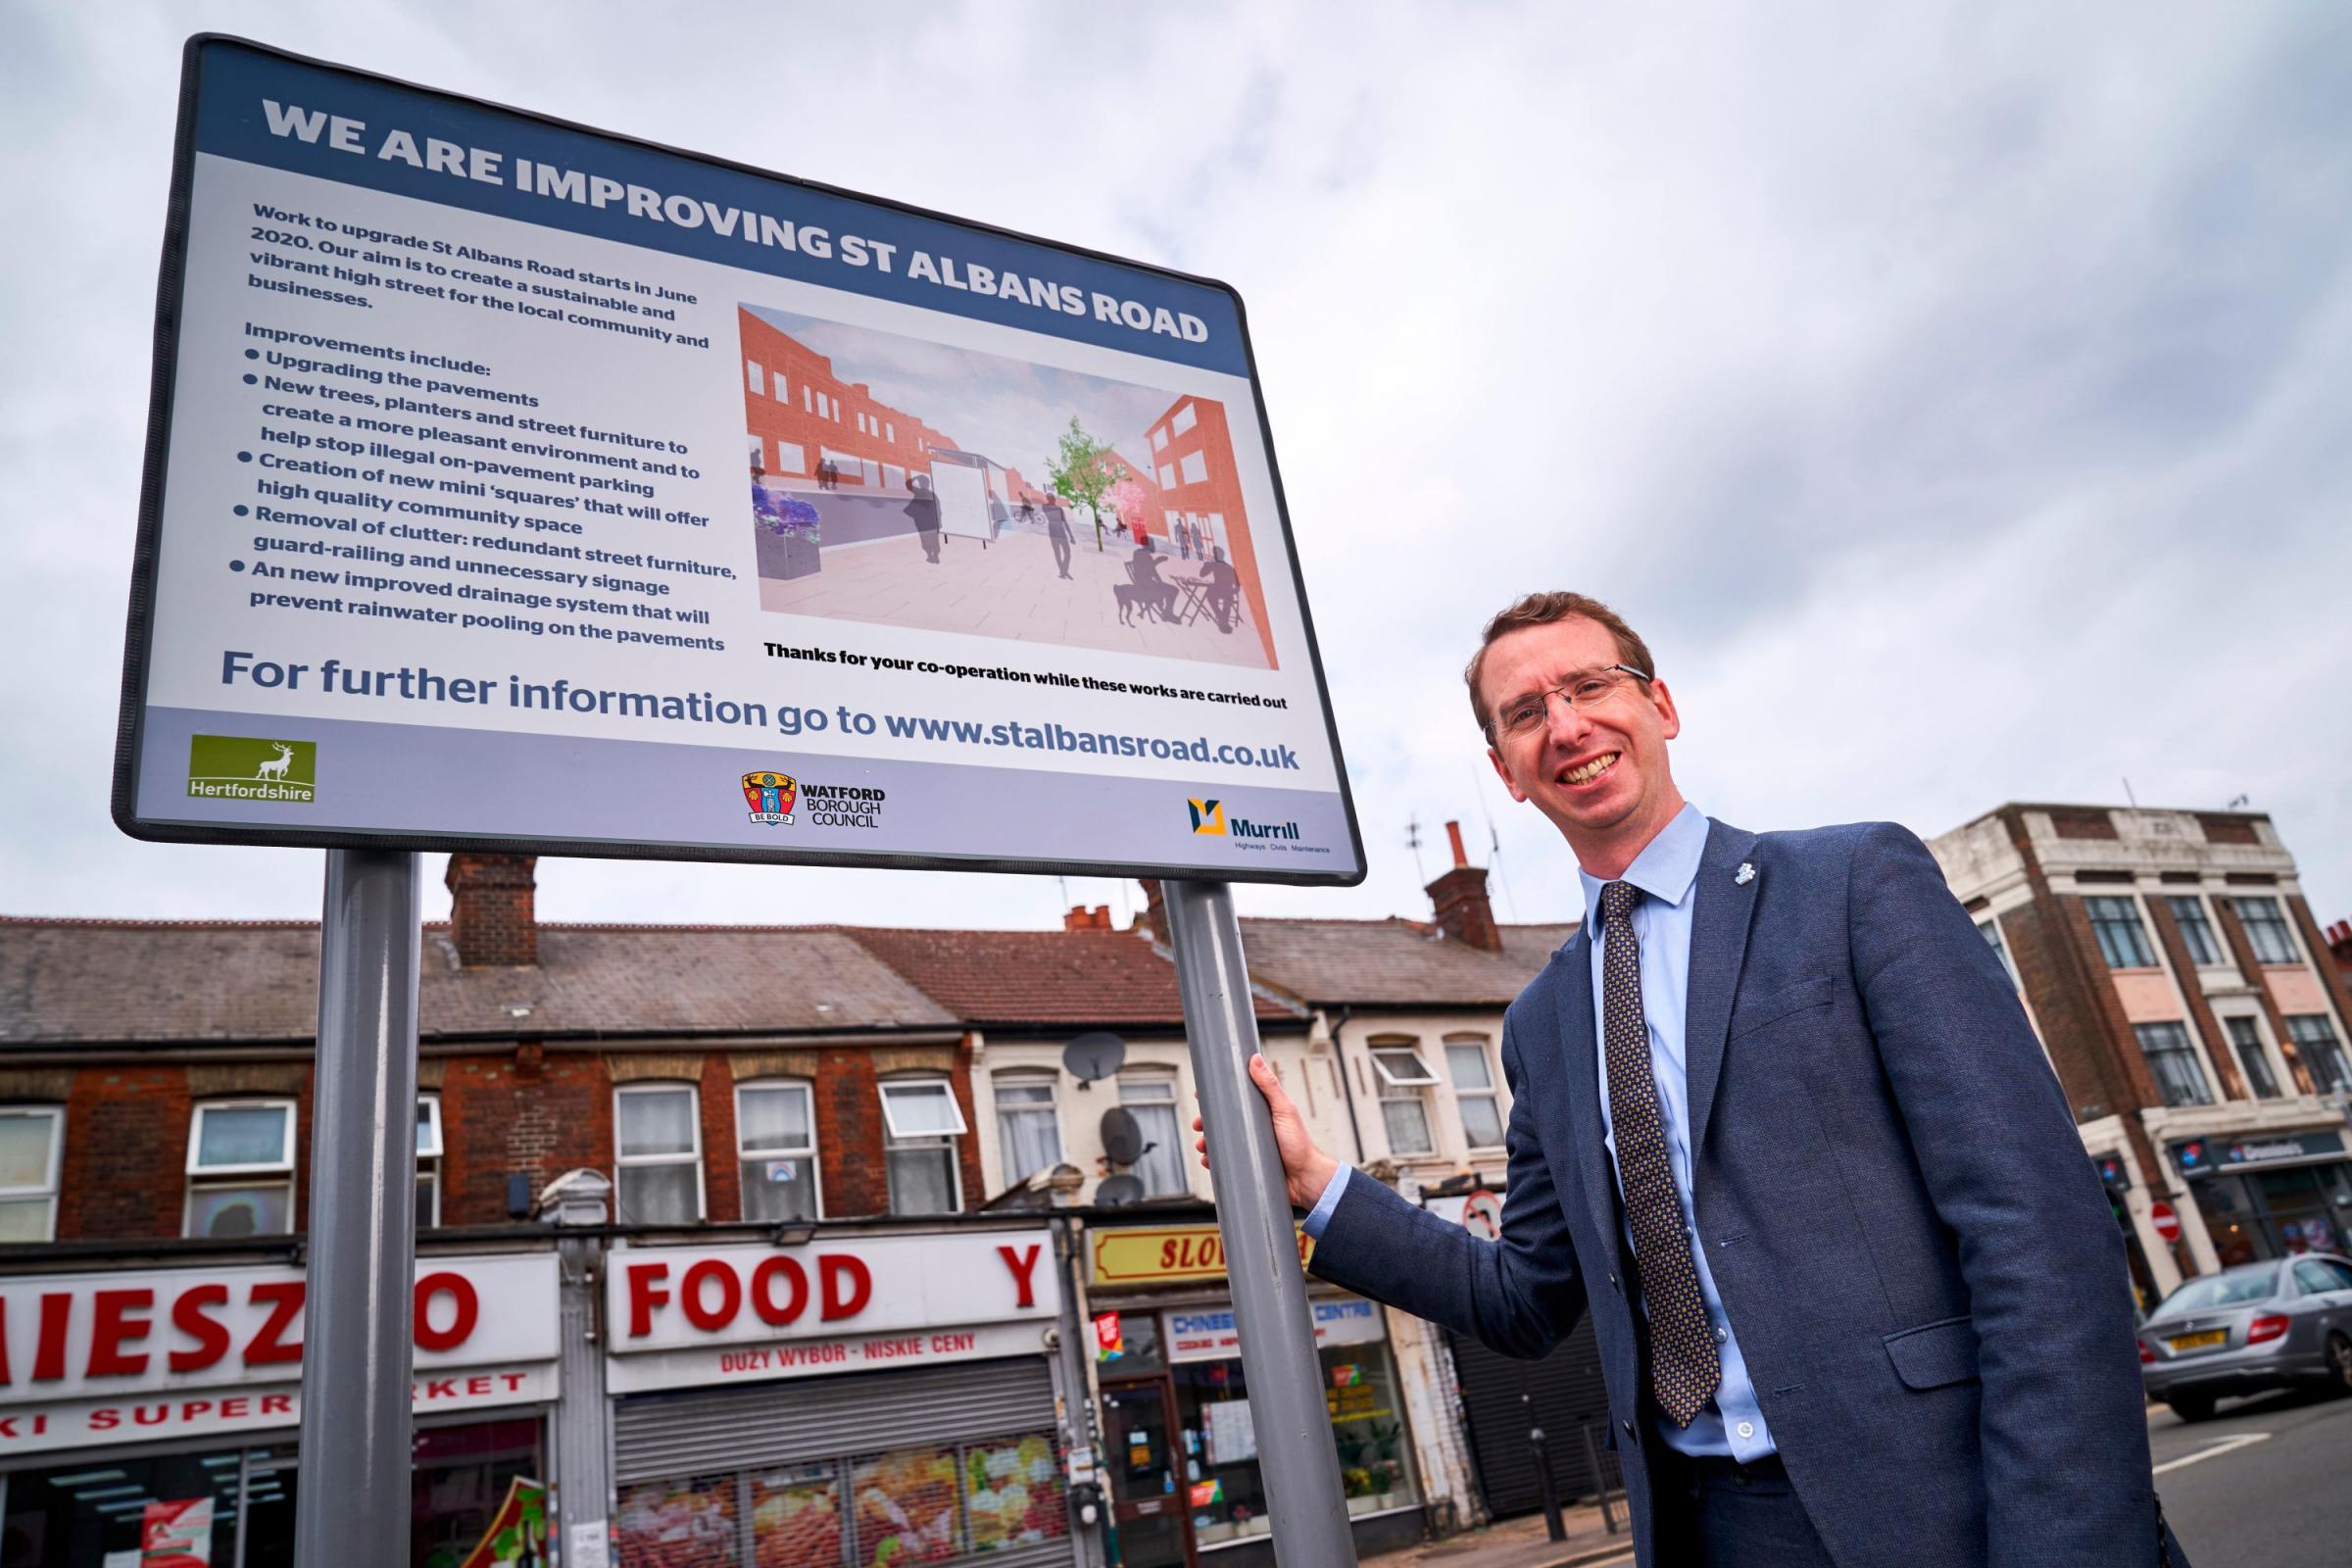 Watford mayor Peter Taylor pictured by a sign outining the ongoing improvements for St Albans Road